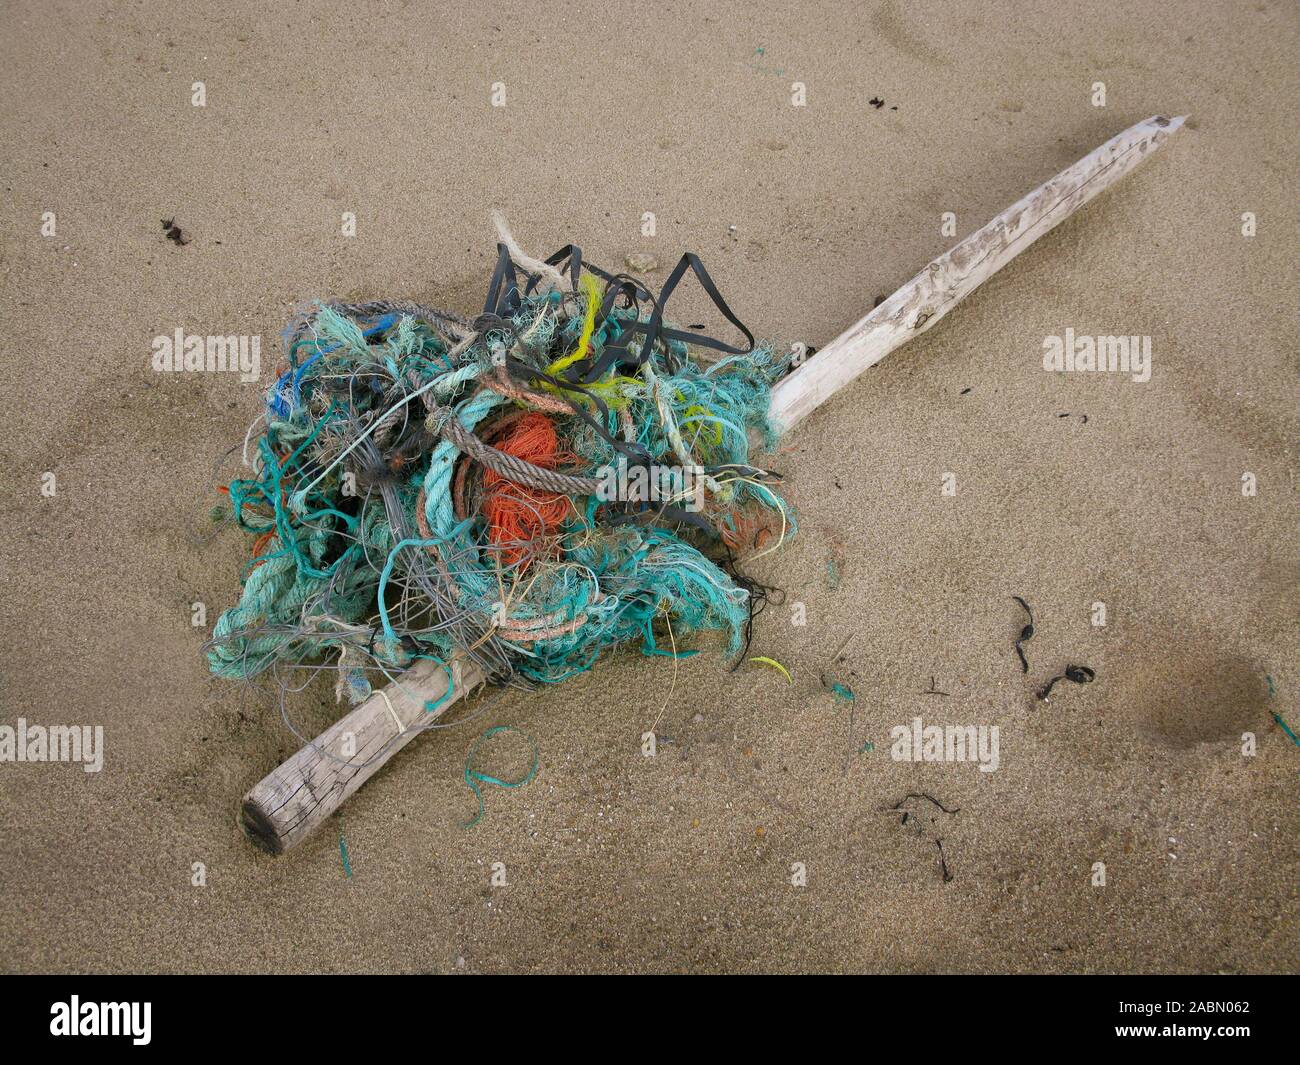 Discarded rubbish, fishing net, a wooden post and debris washed onto the sand, Bretignolles-sur-Mer, Vendee, South west France Stock Photo